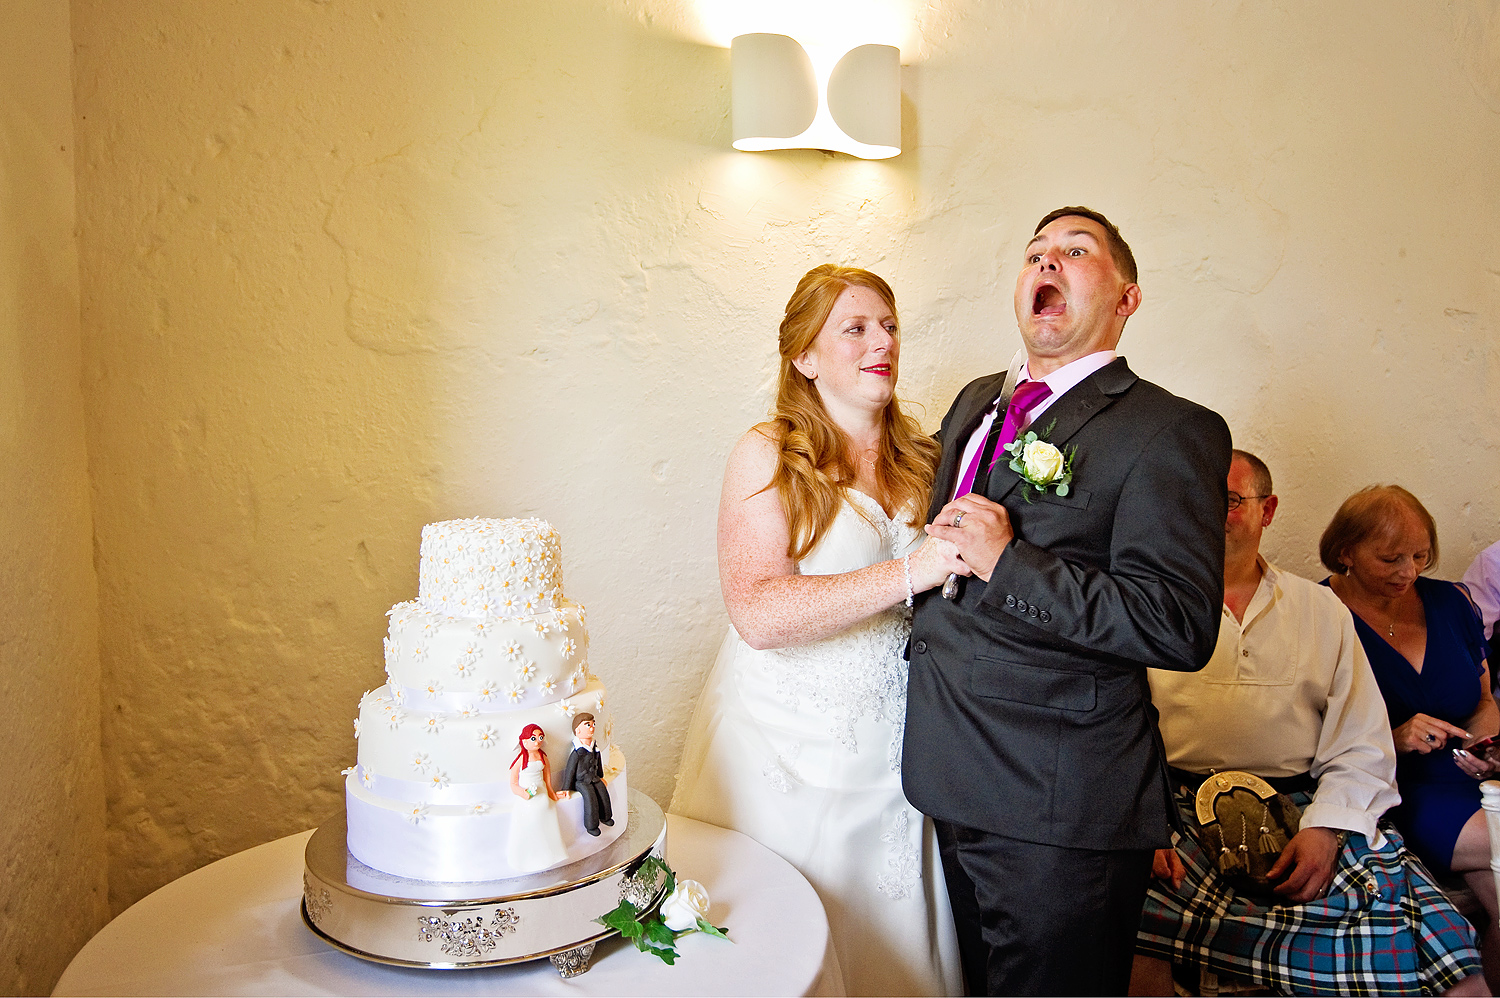 Funny cutting the cake photo at a Bath wedding as bride holds knife to groom's chin.